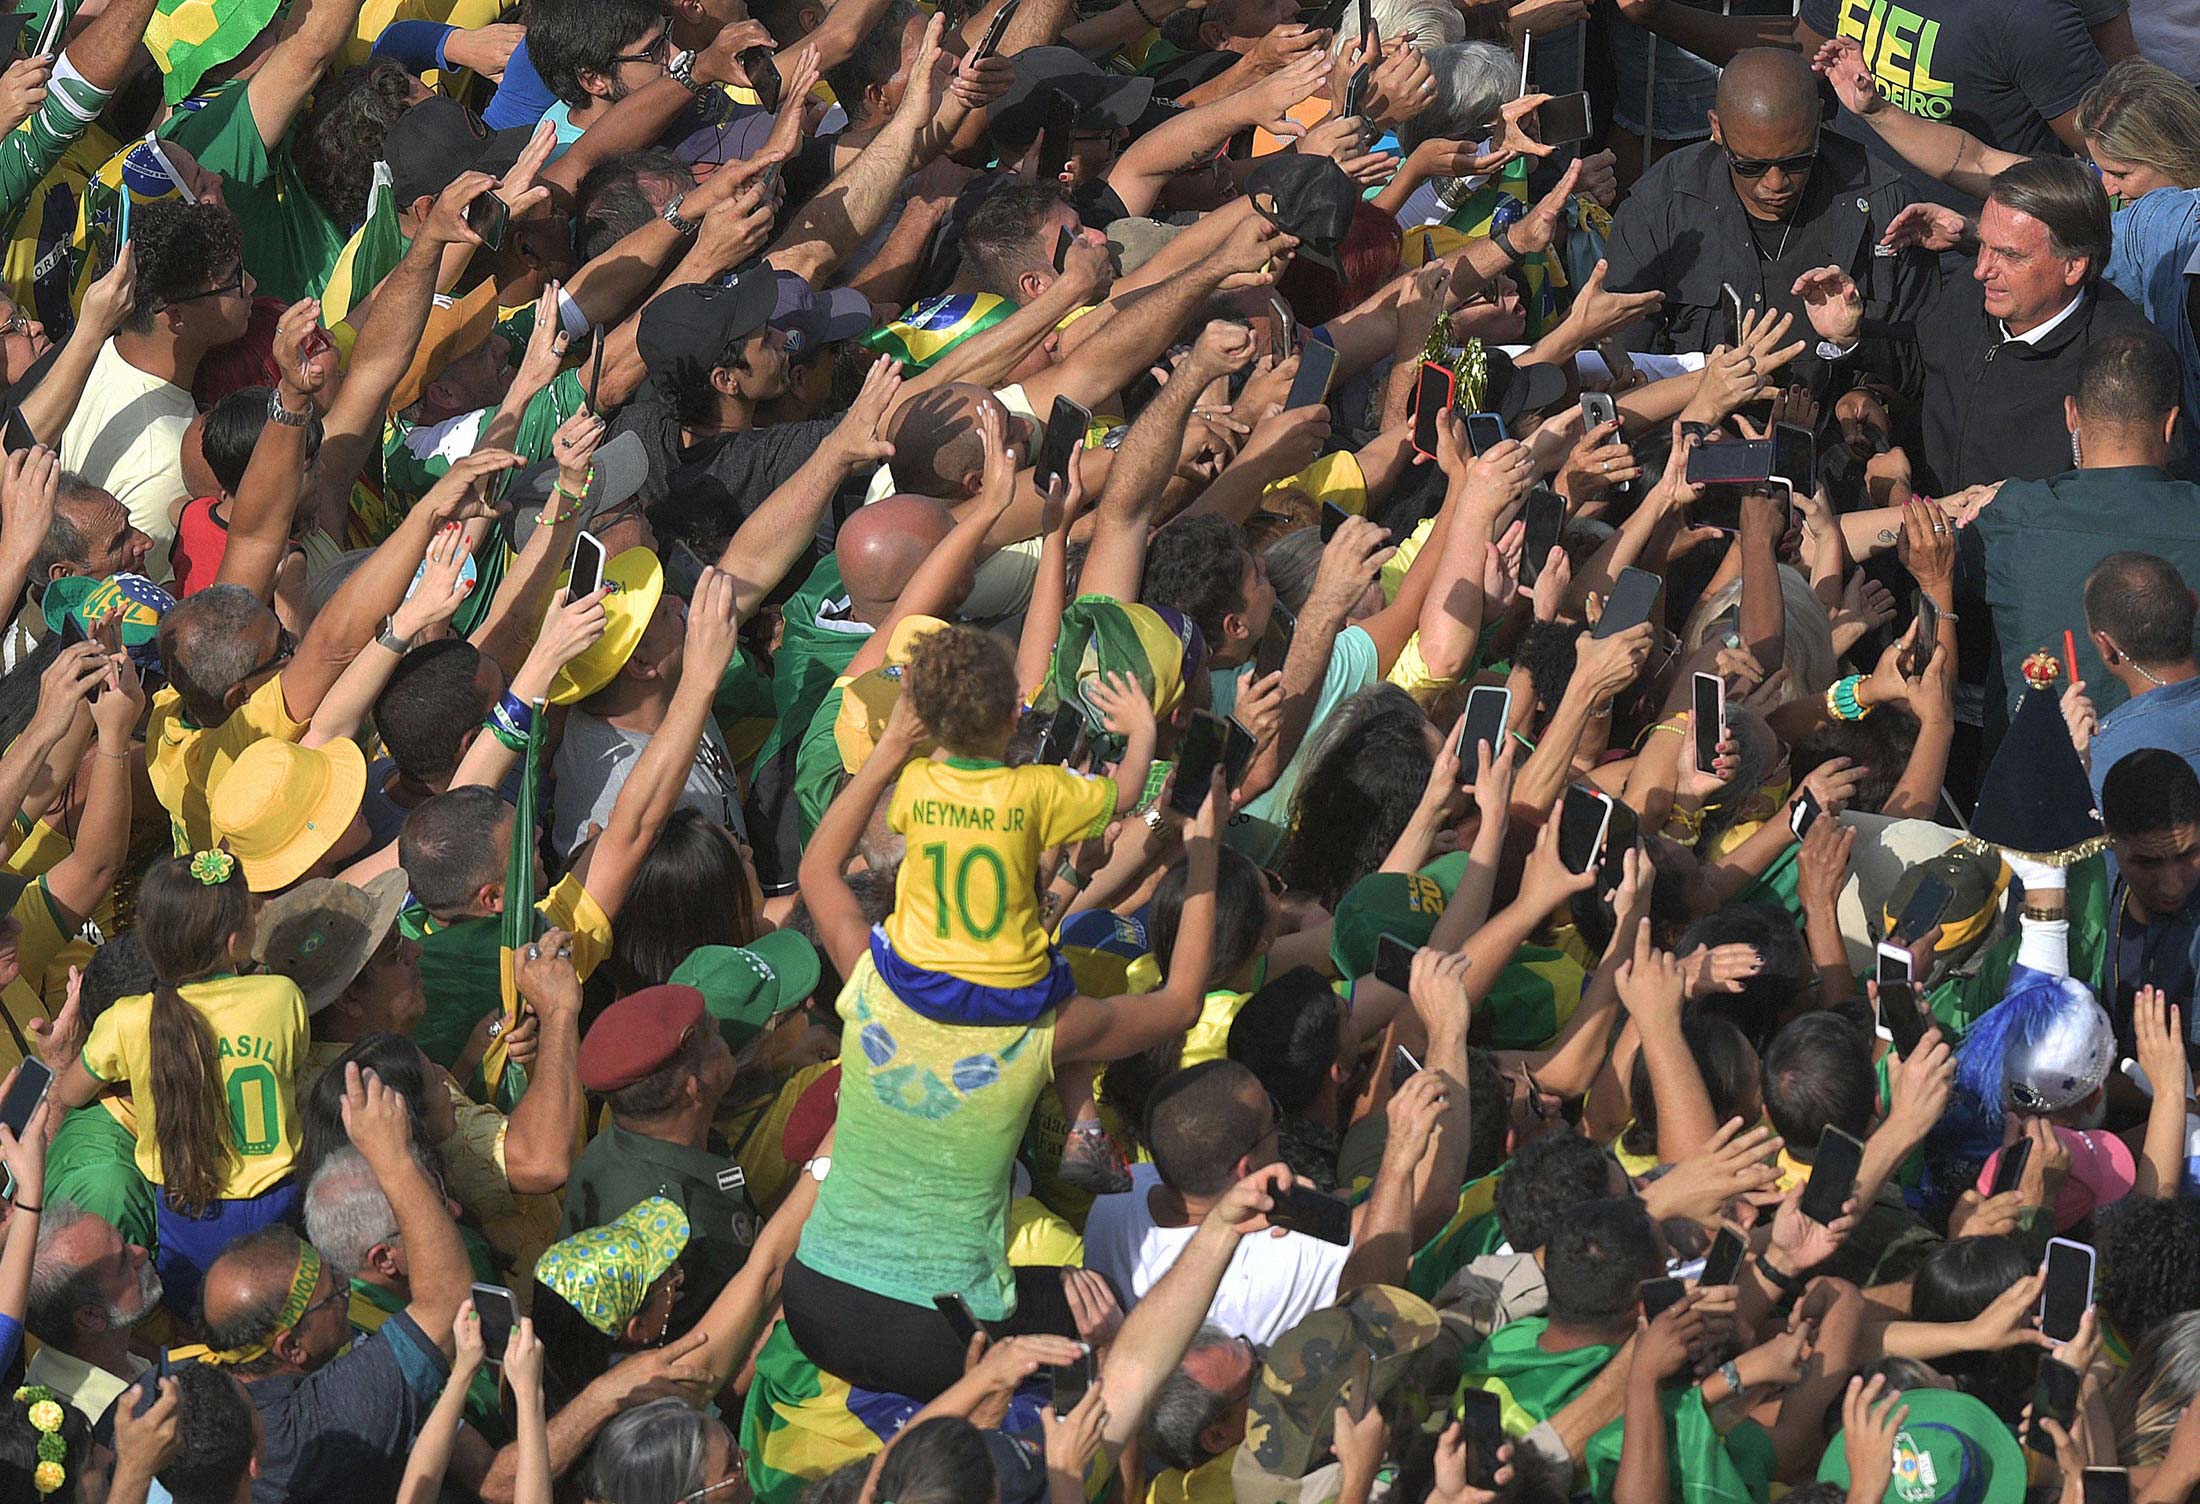 Brazilian President Jair Bolsonaro (top right) greets supporters during celebrations to mark the country’s 200th anniversary of independence&nbsp;at Copacabana Beach in Rio de Janeiro&nbsp;on Sept. 7.